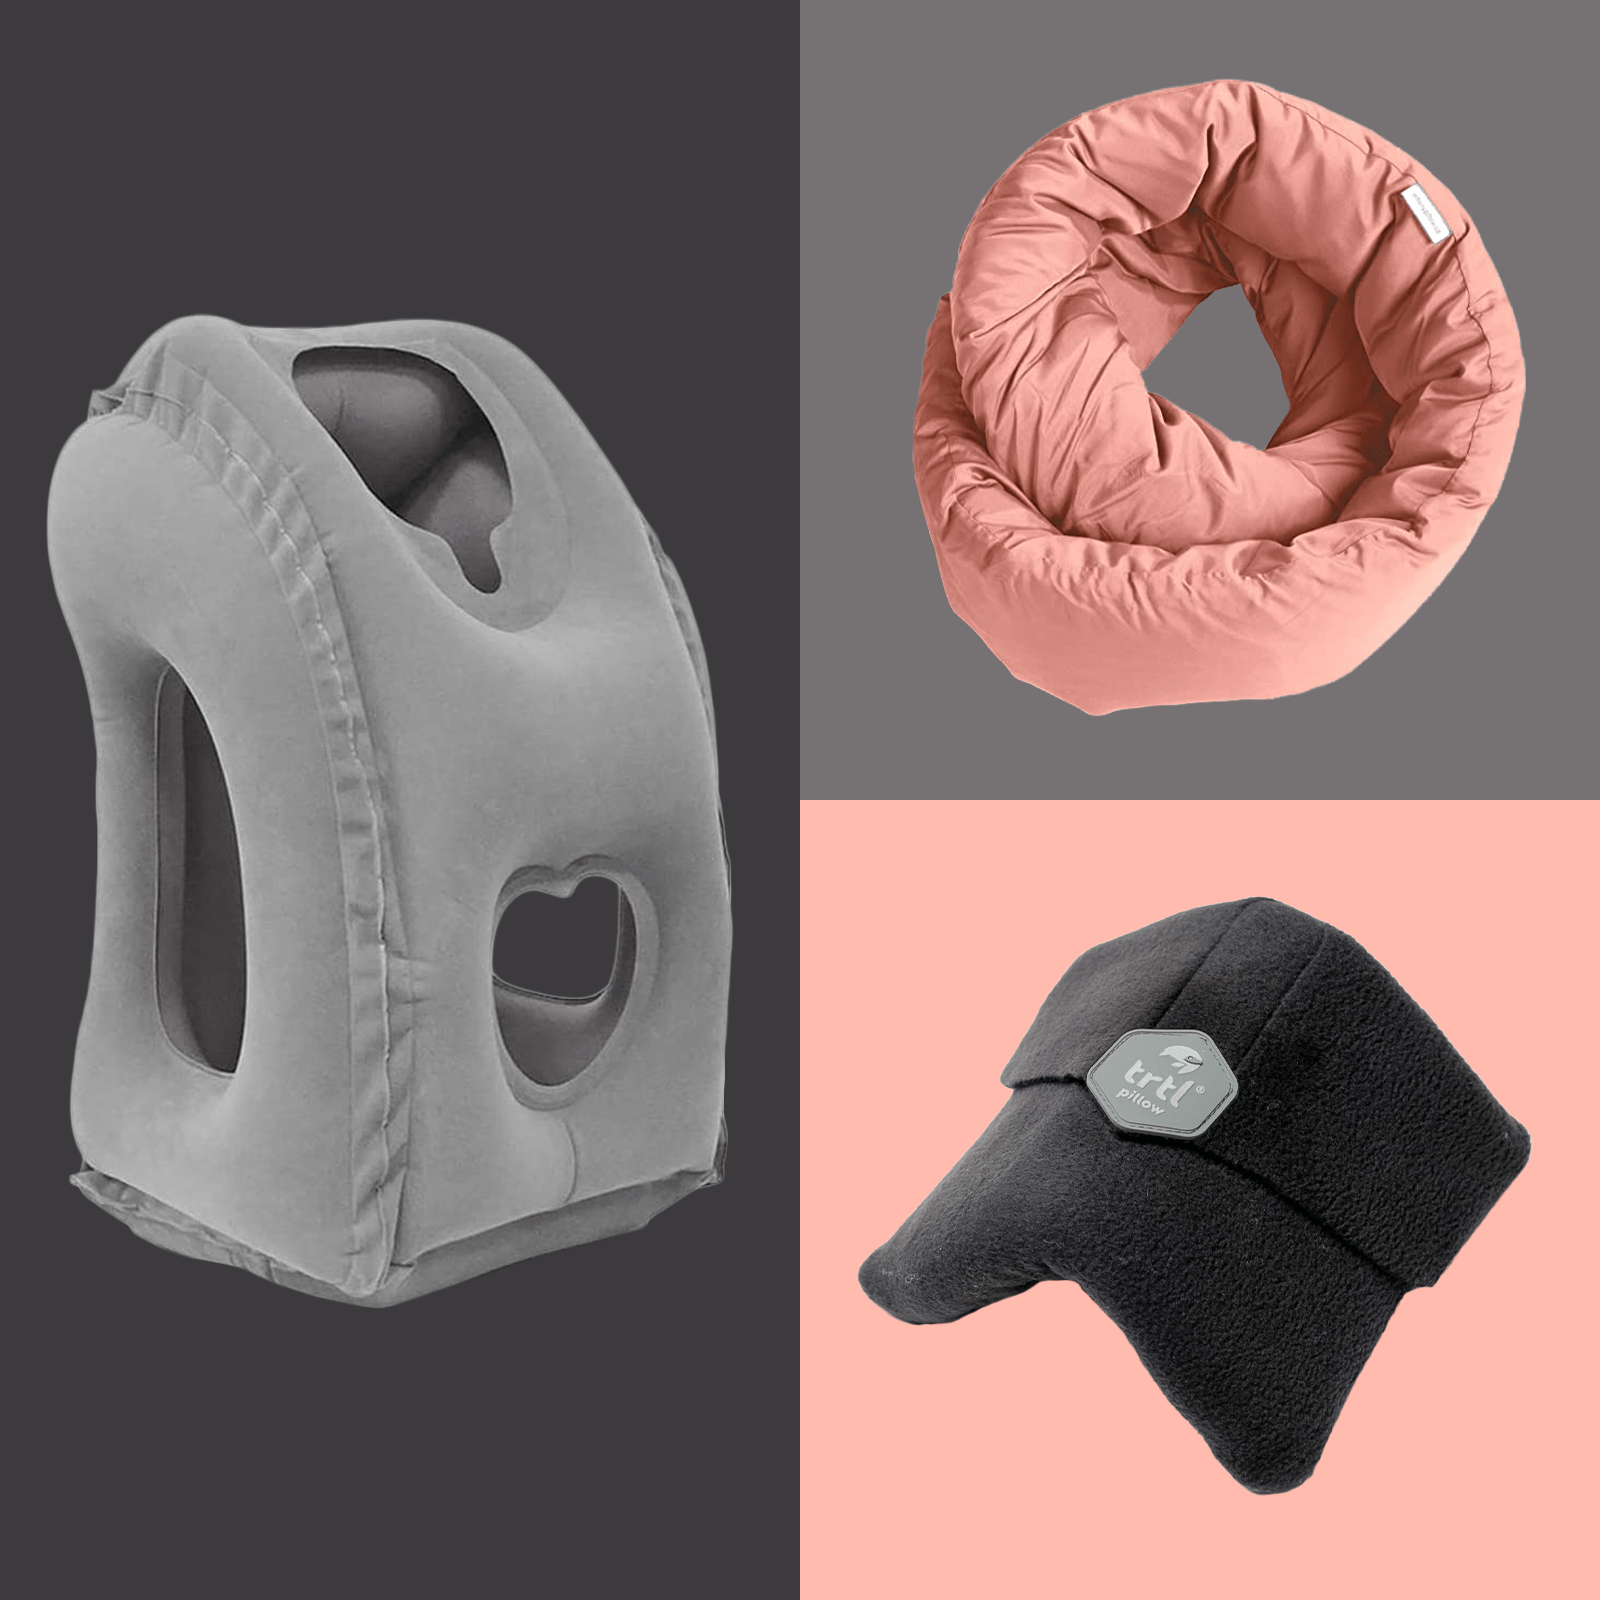 This Travel Pillow Is 30% Off at